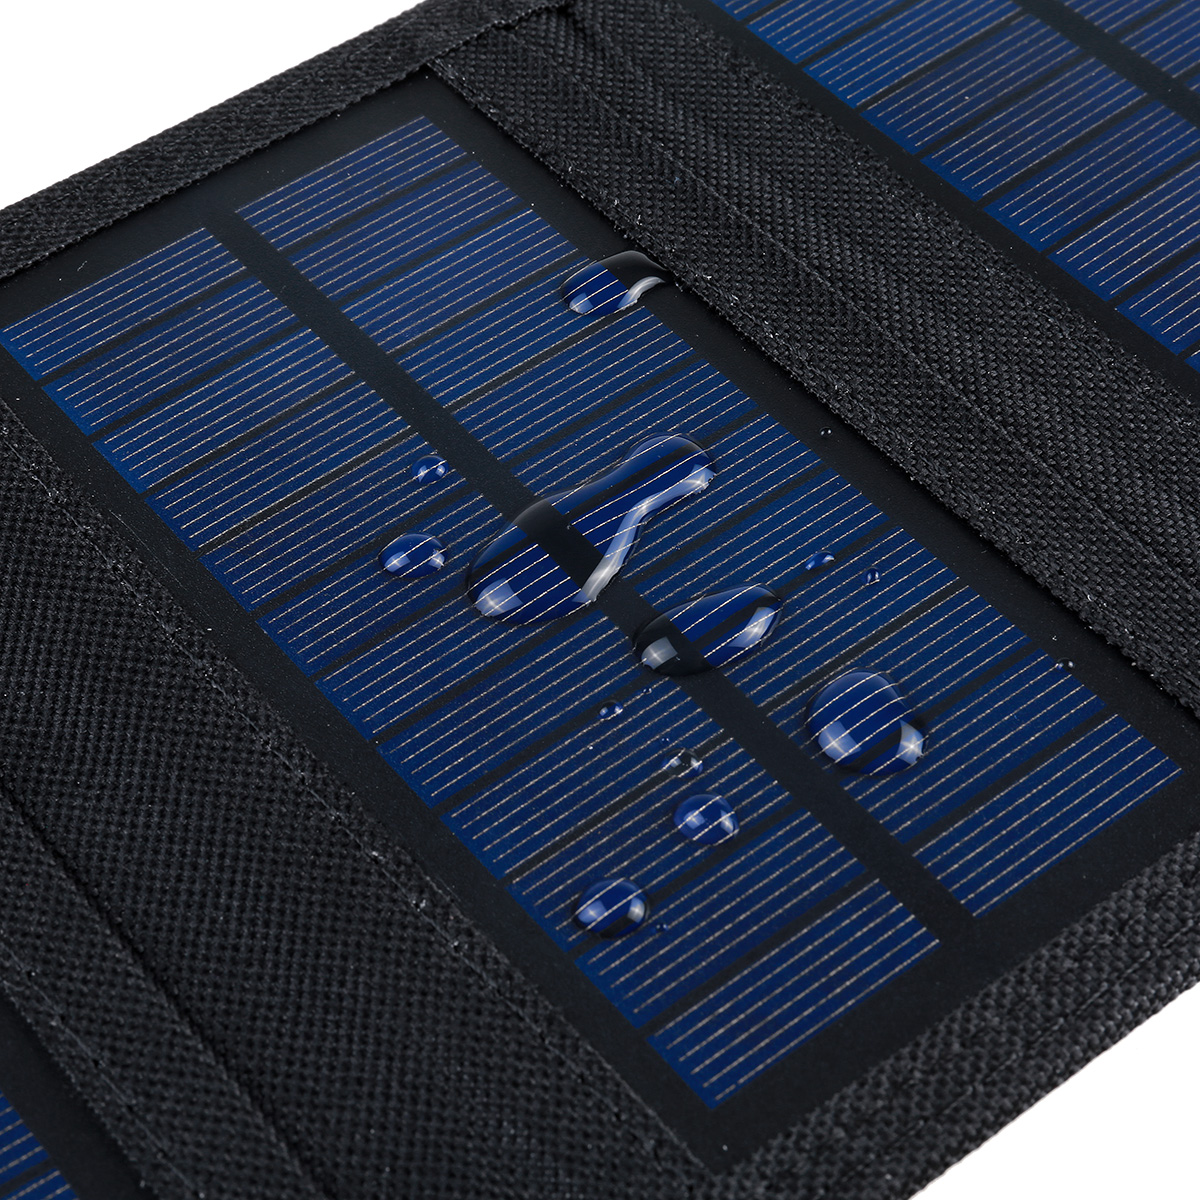 45W6W75W-Solar-Panel-Charger-USB-Output-5V-Waterproof-Backpack-Mobile-Power-Bank-1916087-8